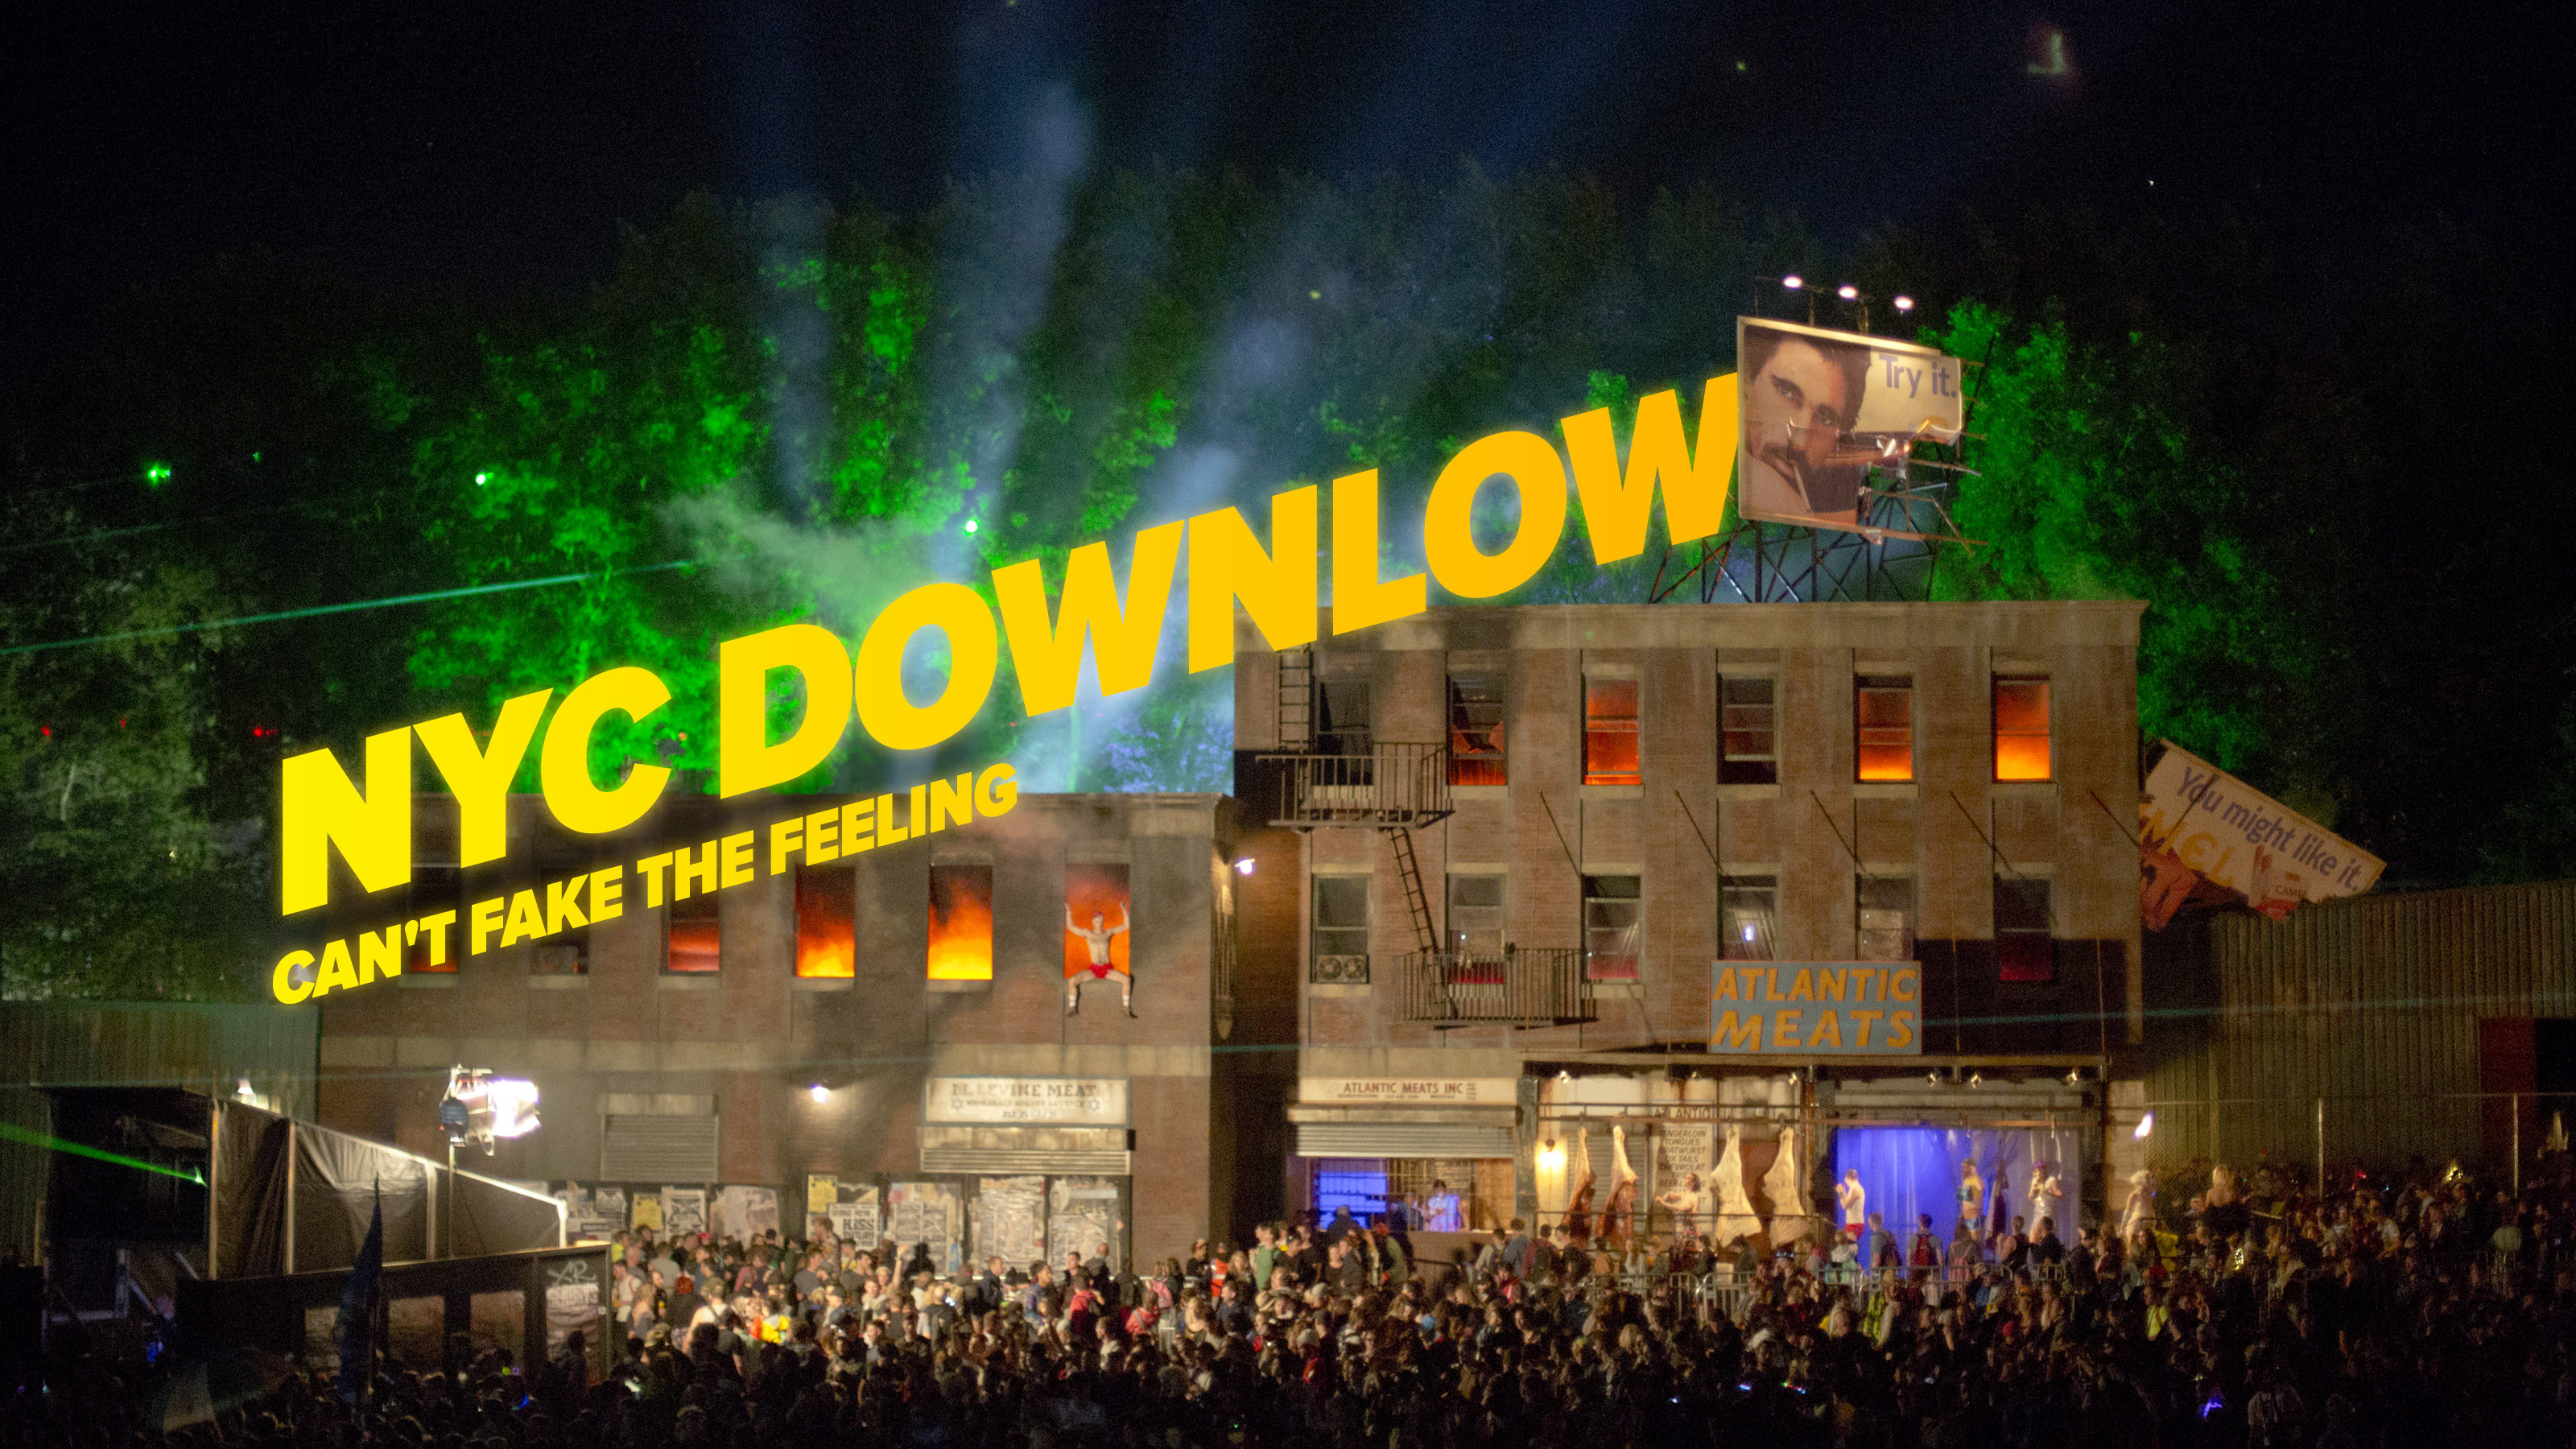 NYC Downlow: Can't fake the feeling